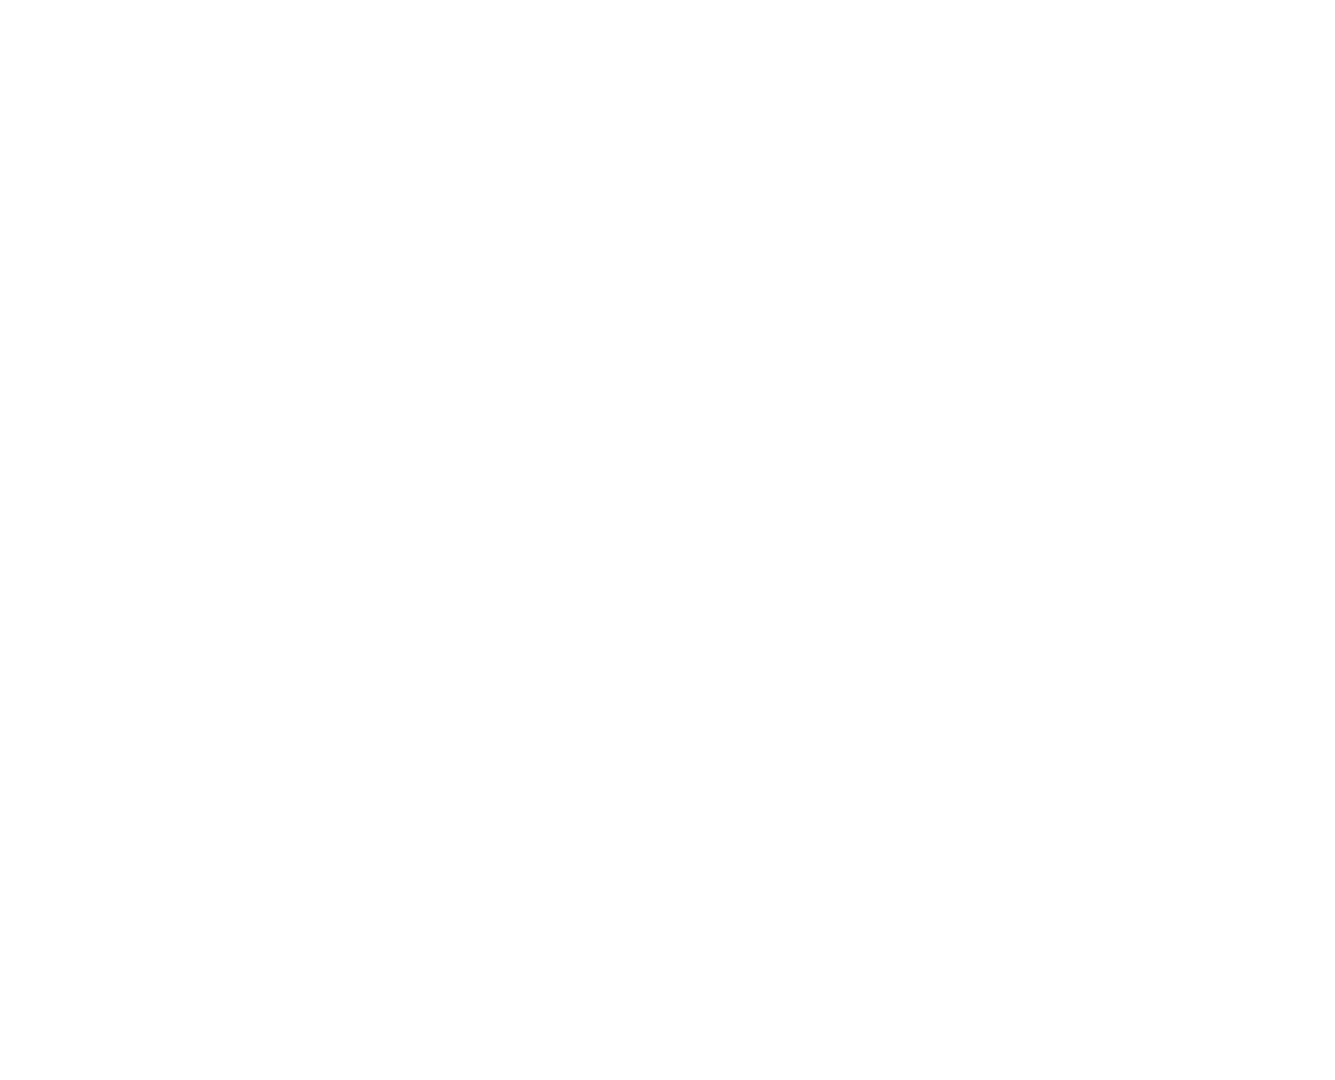 BVC sello efr_color (1)-01 (1) (1).png